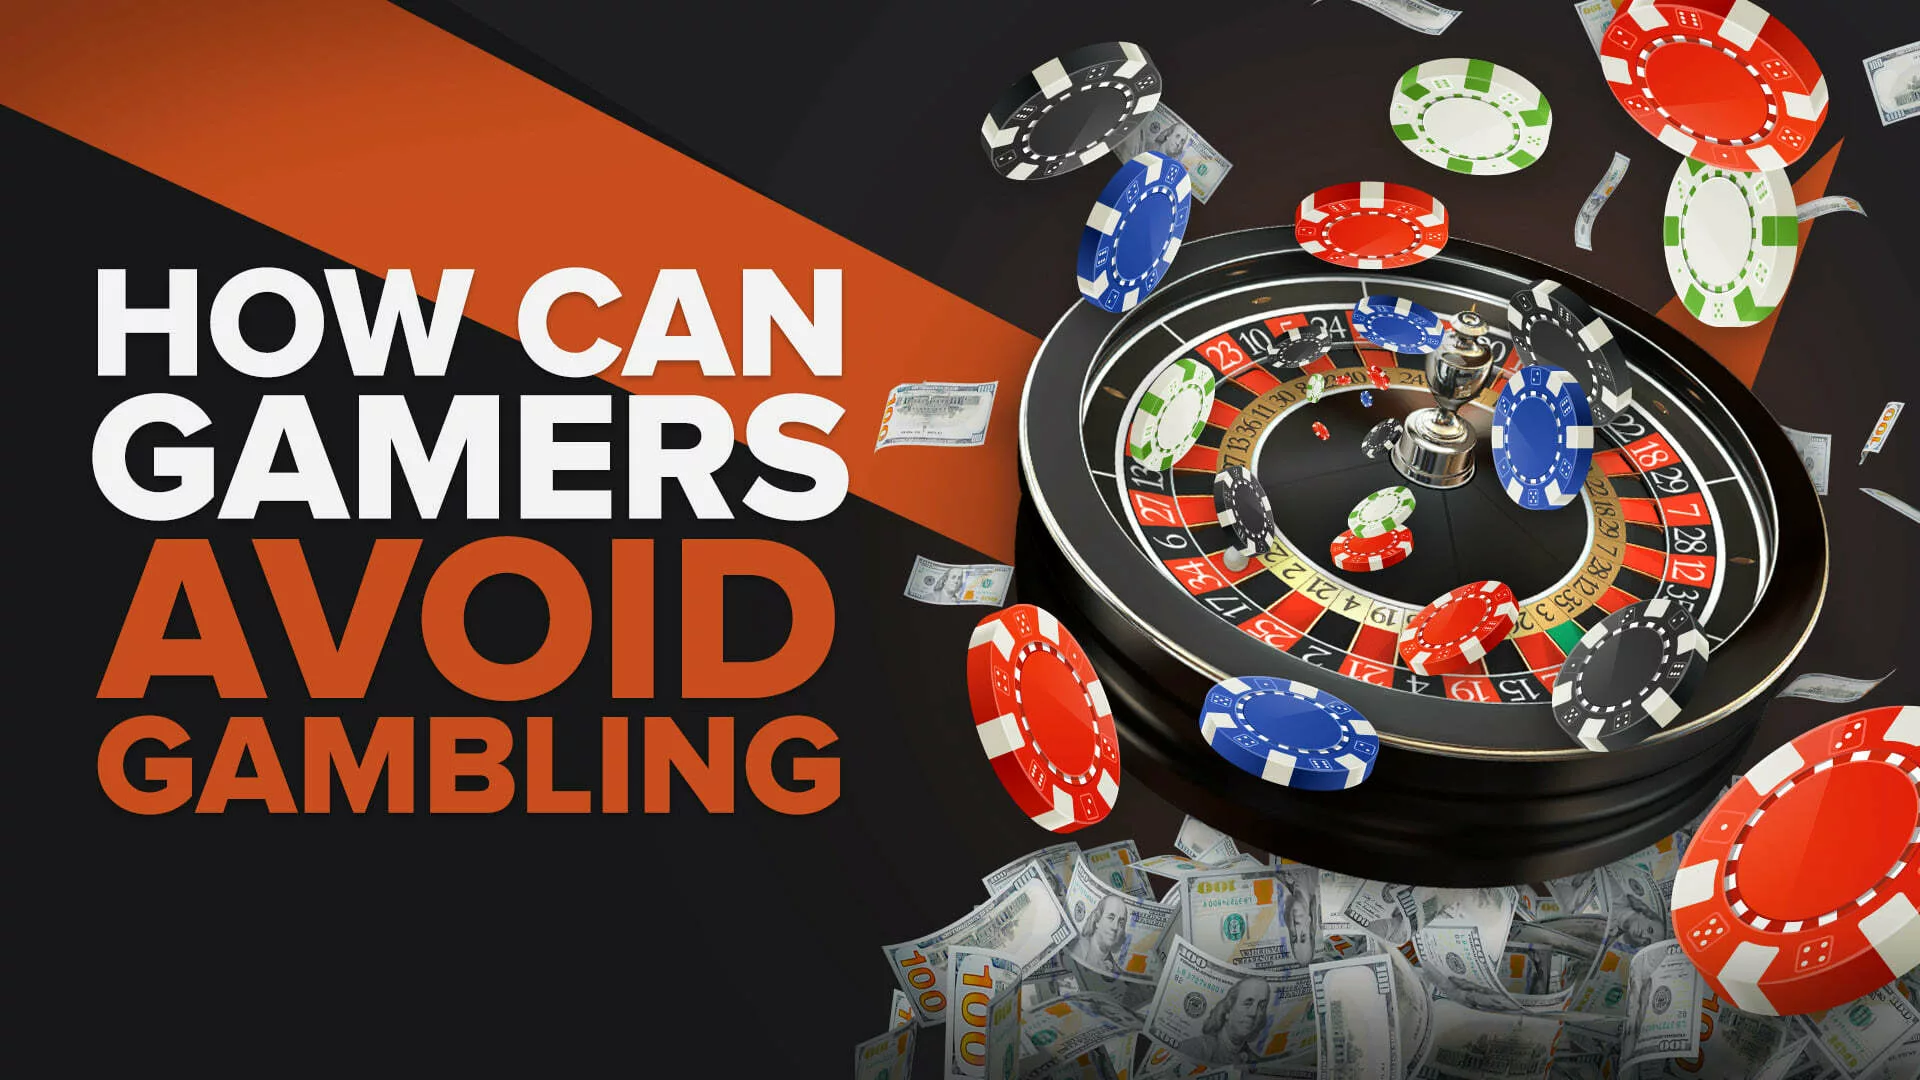 This Is How Video Games Can Help You Avoid Gambling On Gamstop